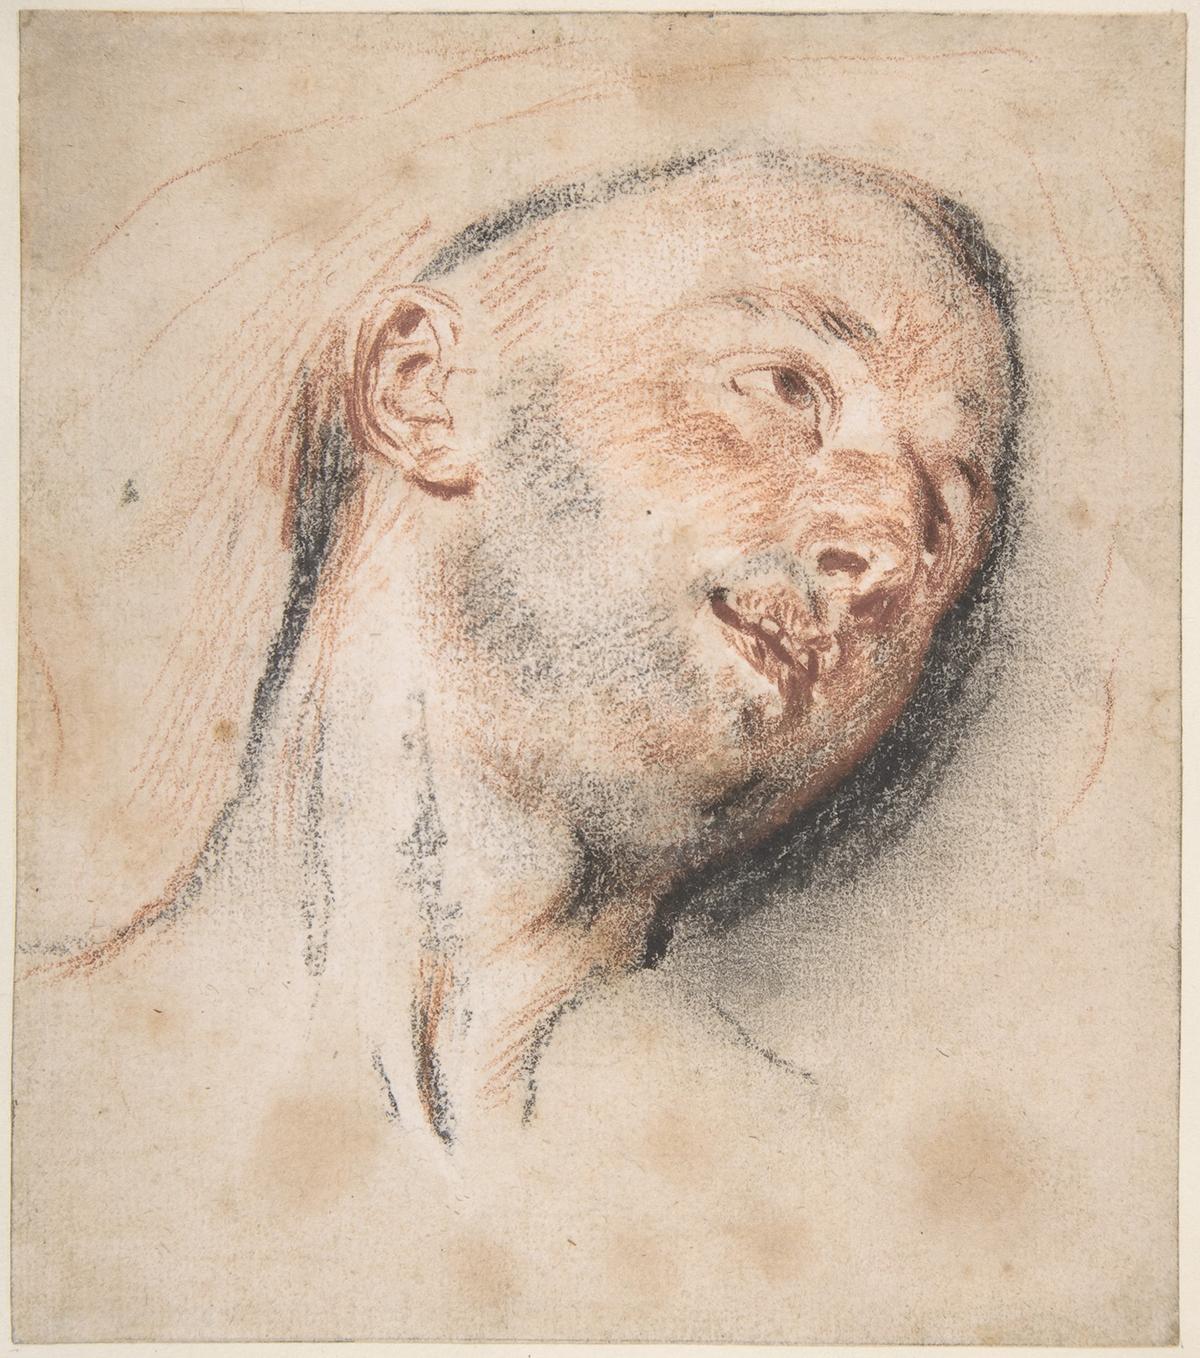 "Head of a Man," circa 1718, by Antoine Watteau. Red and black chalk; 5 7/8 inches by 5 3/16 inches. The Metropolitan Museum of Art, New York City. (Public Domain)